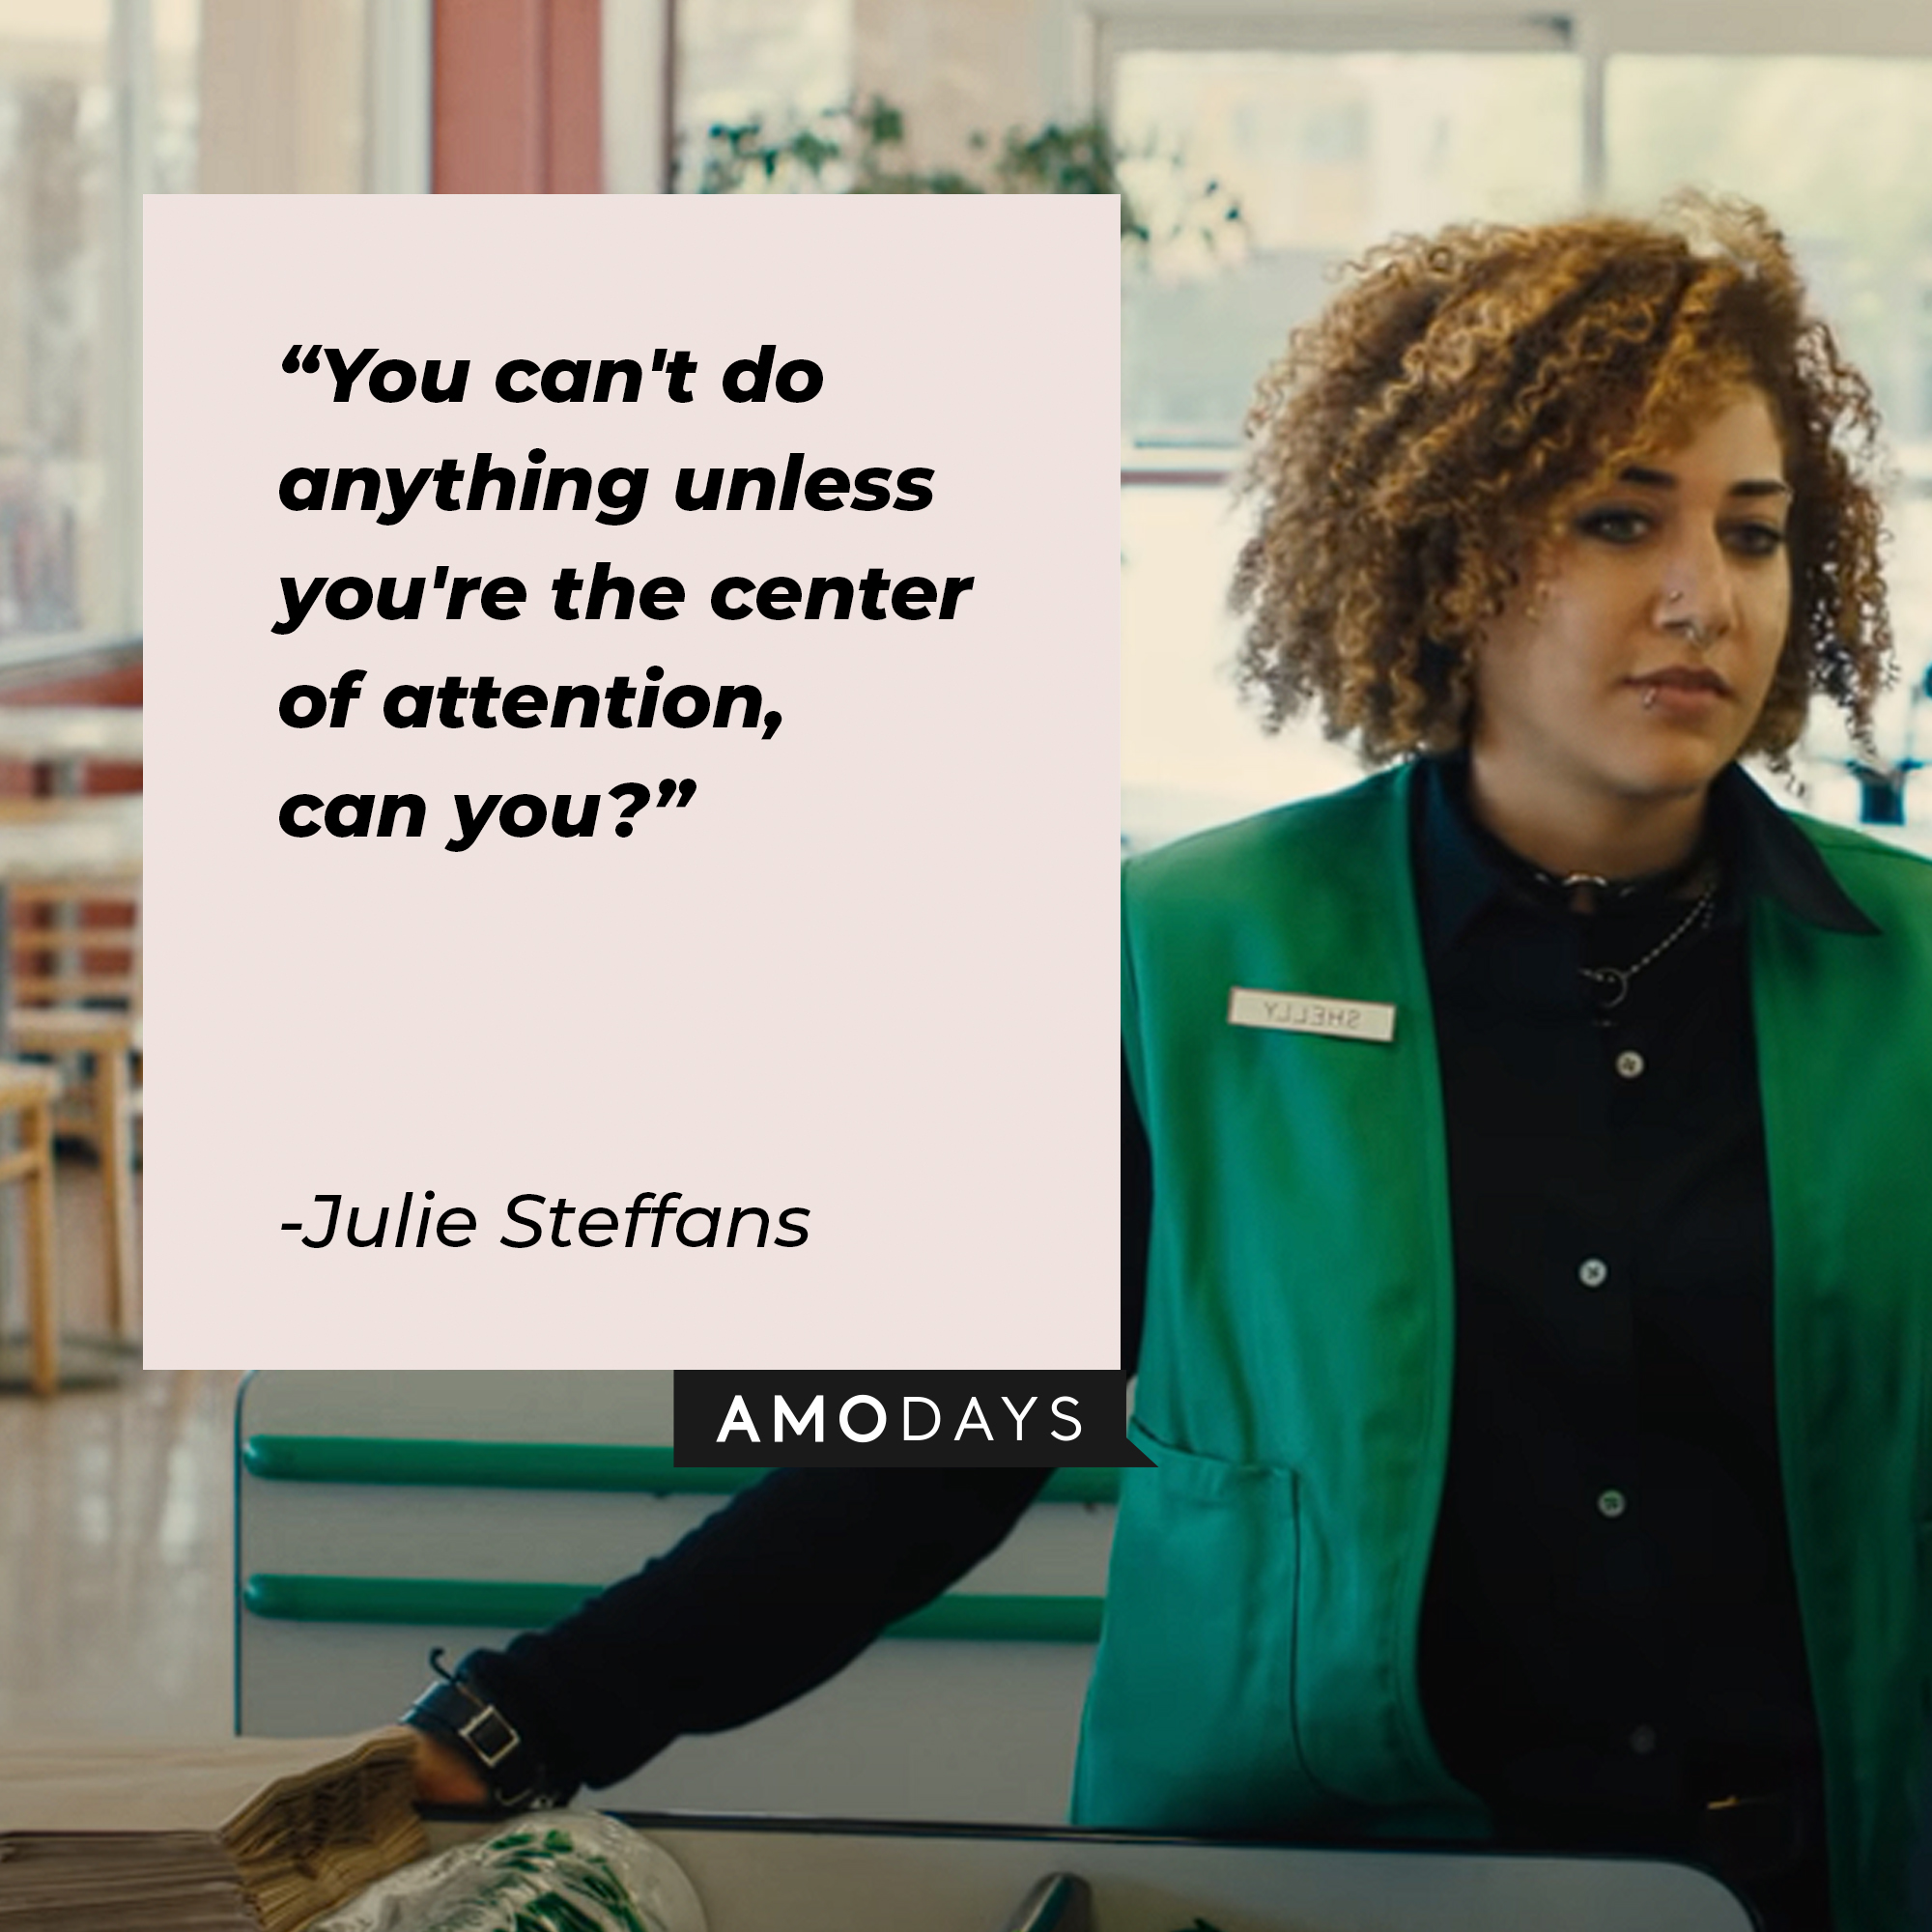 Julie Steffans' quote: "You can't do anything unless you're the center of attention, can you?" | Source: youtube.com/A24